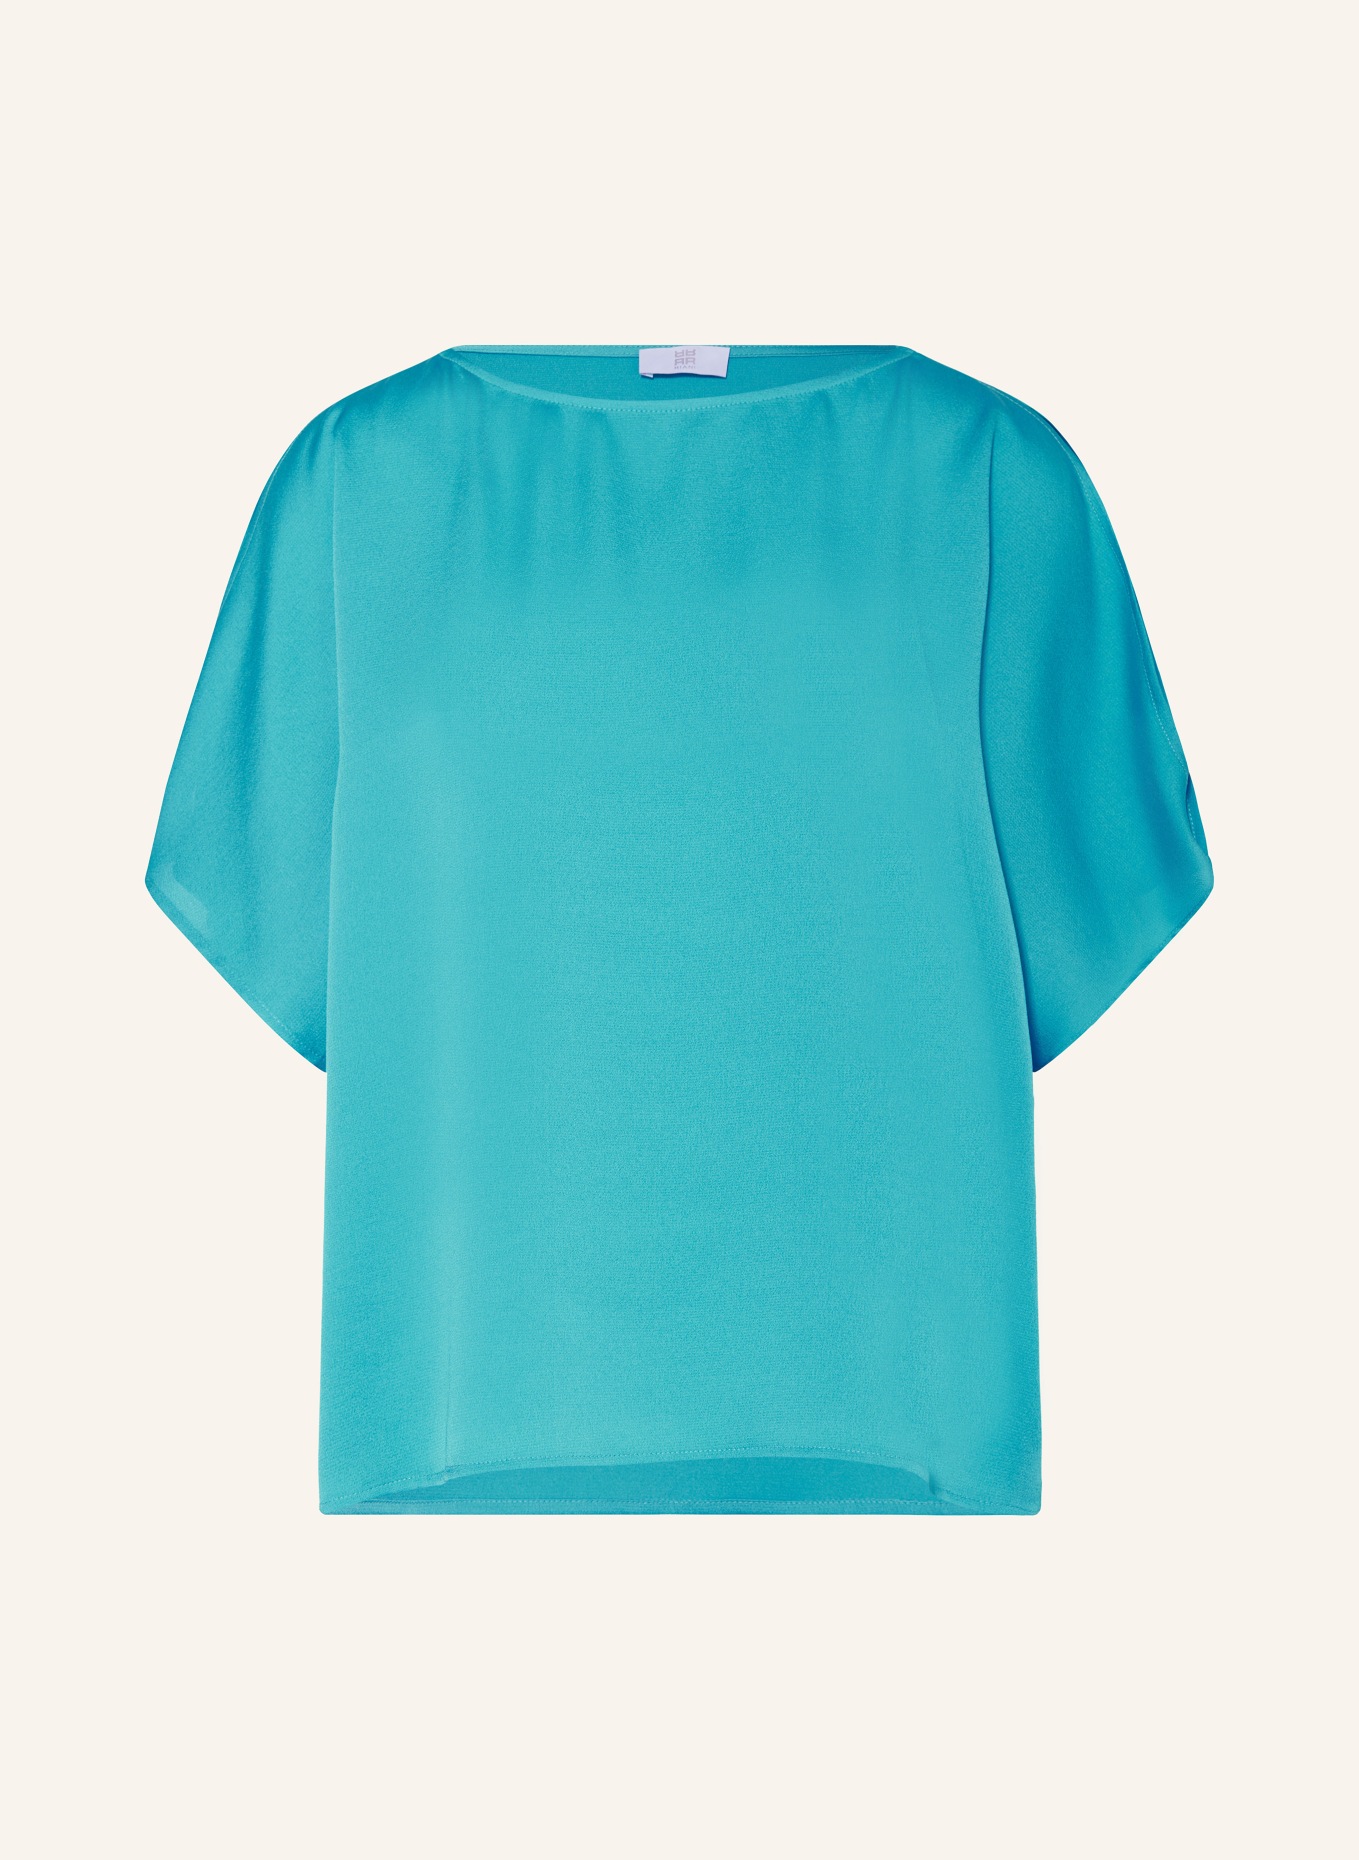 RIANI Oversized shirt blouse, Color: TEAL (Image 1)